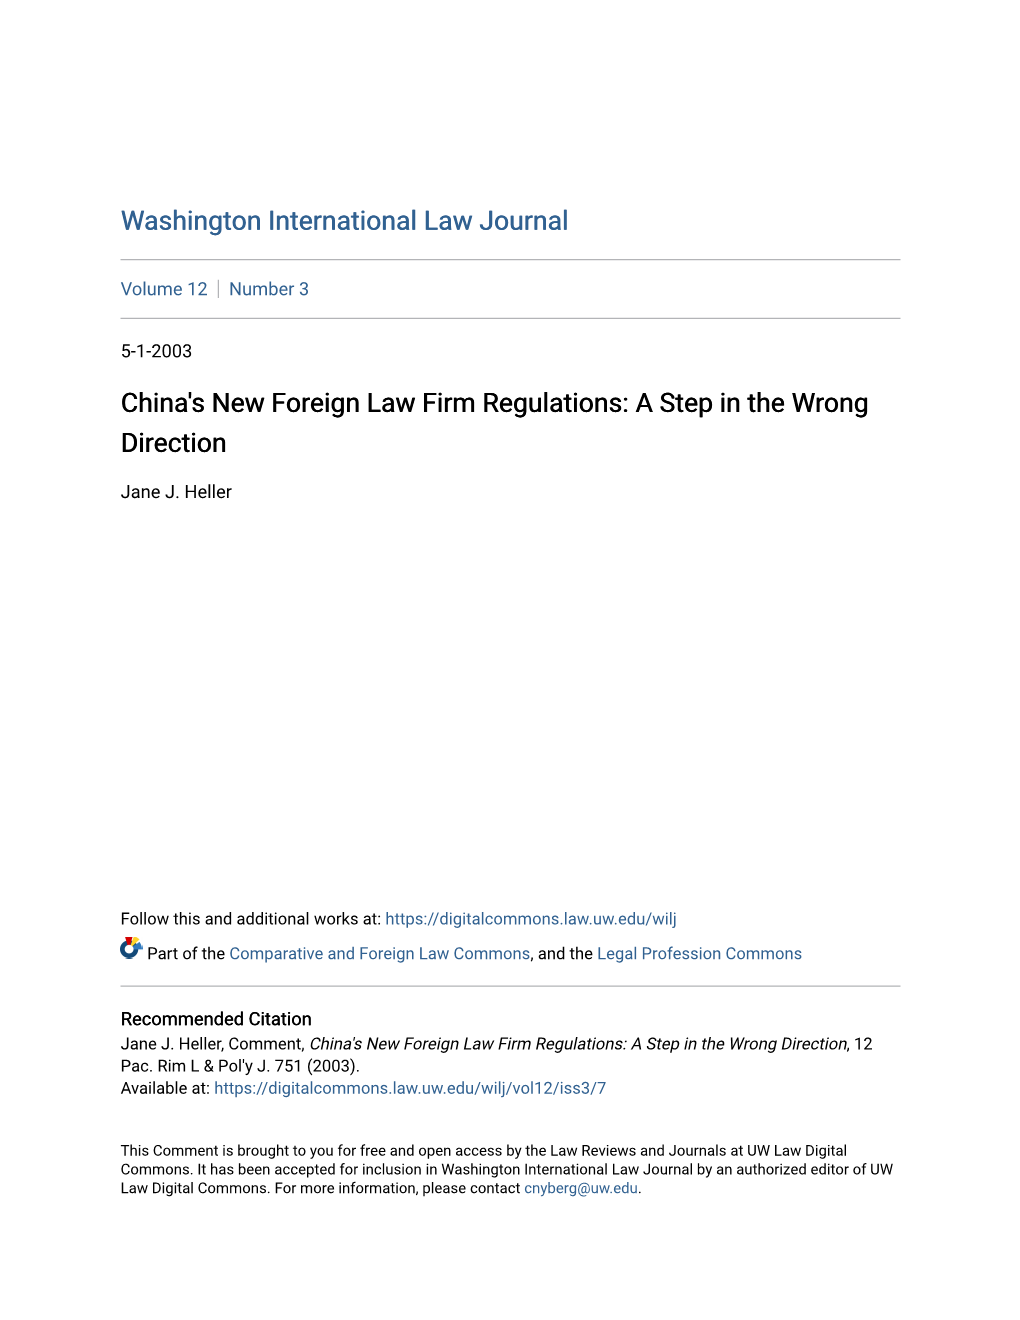 China's New Foreign Law Firm Regulations: a Step in the Wrong Direction